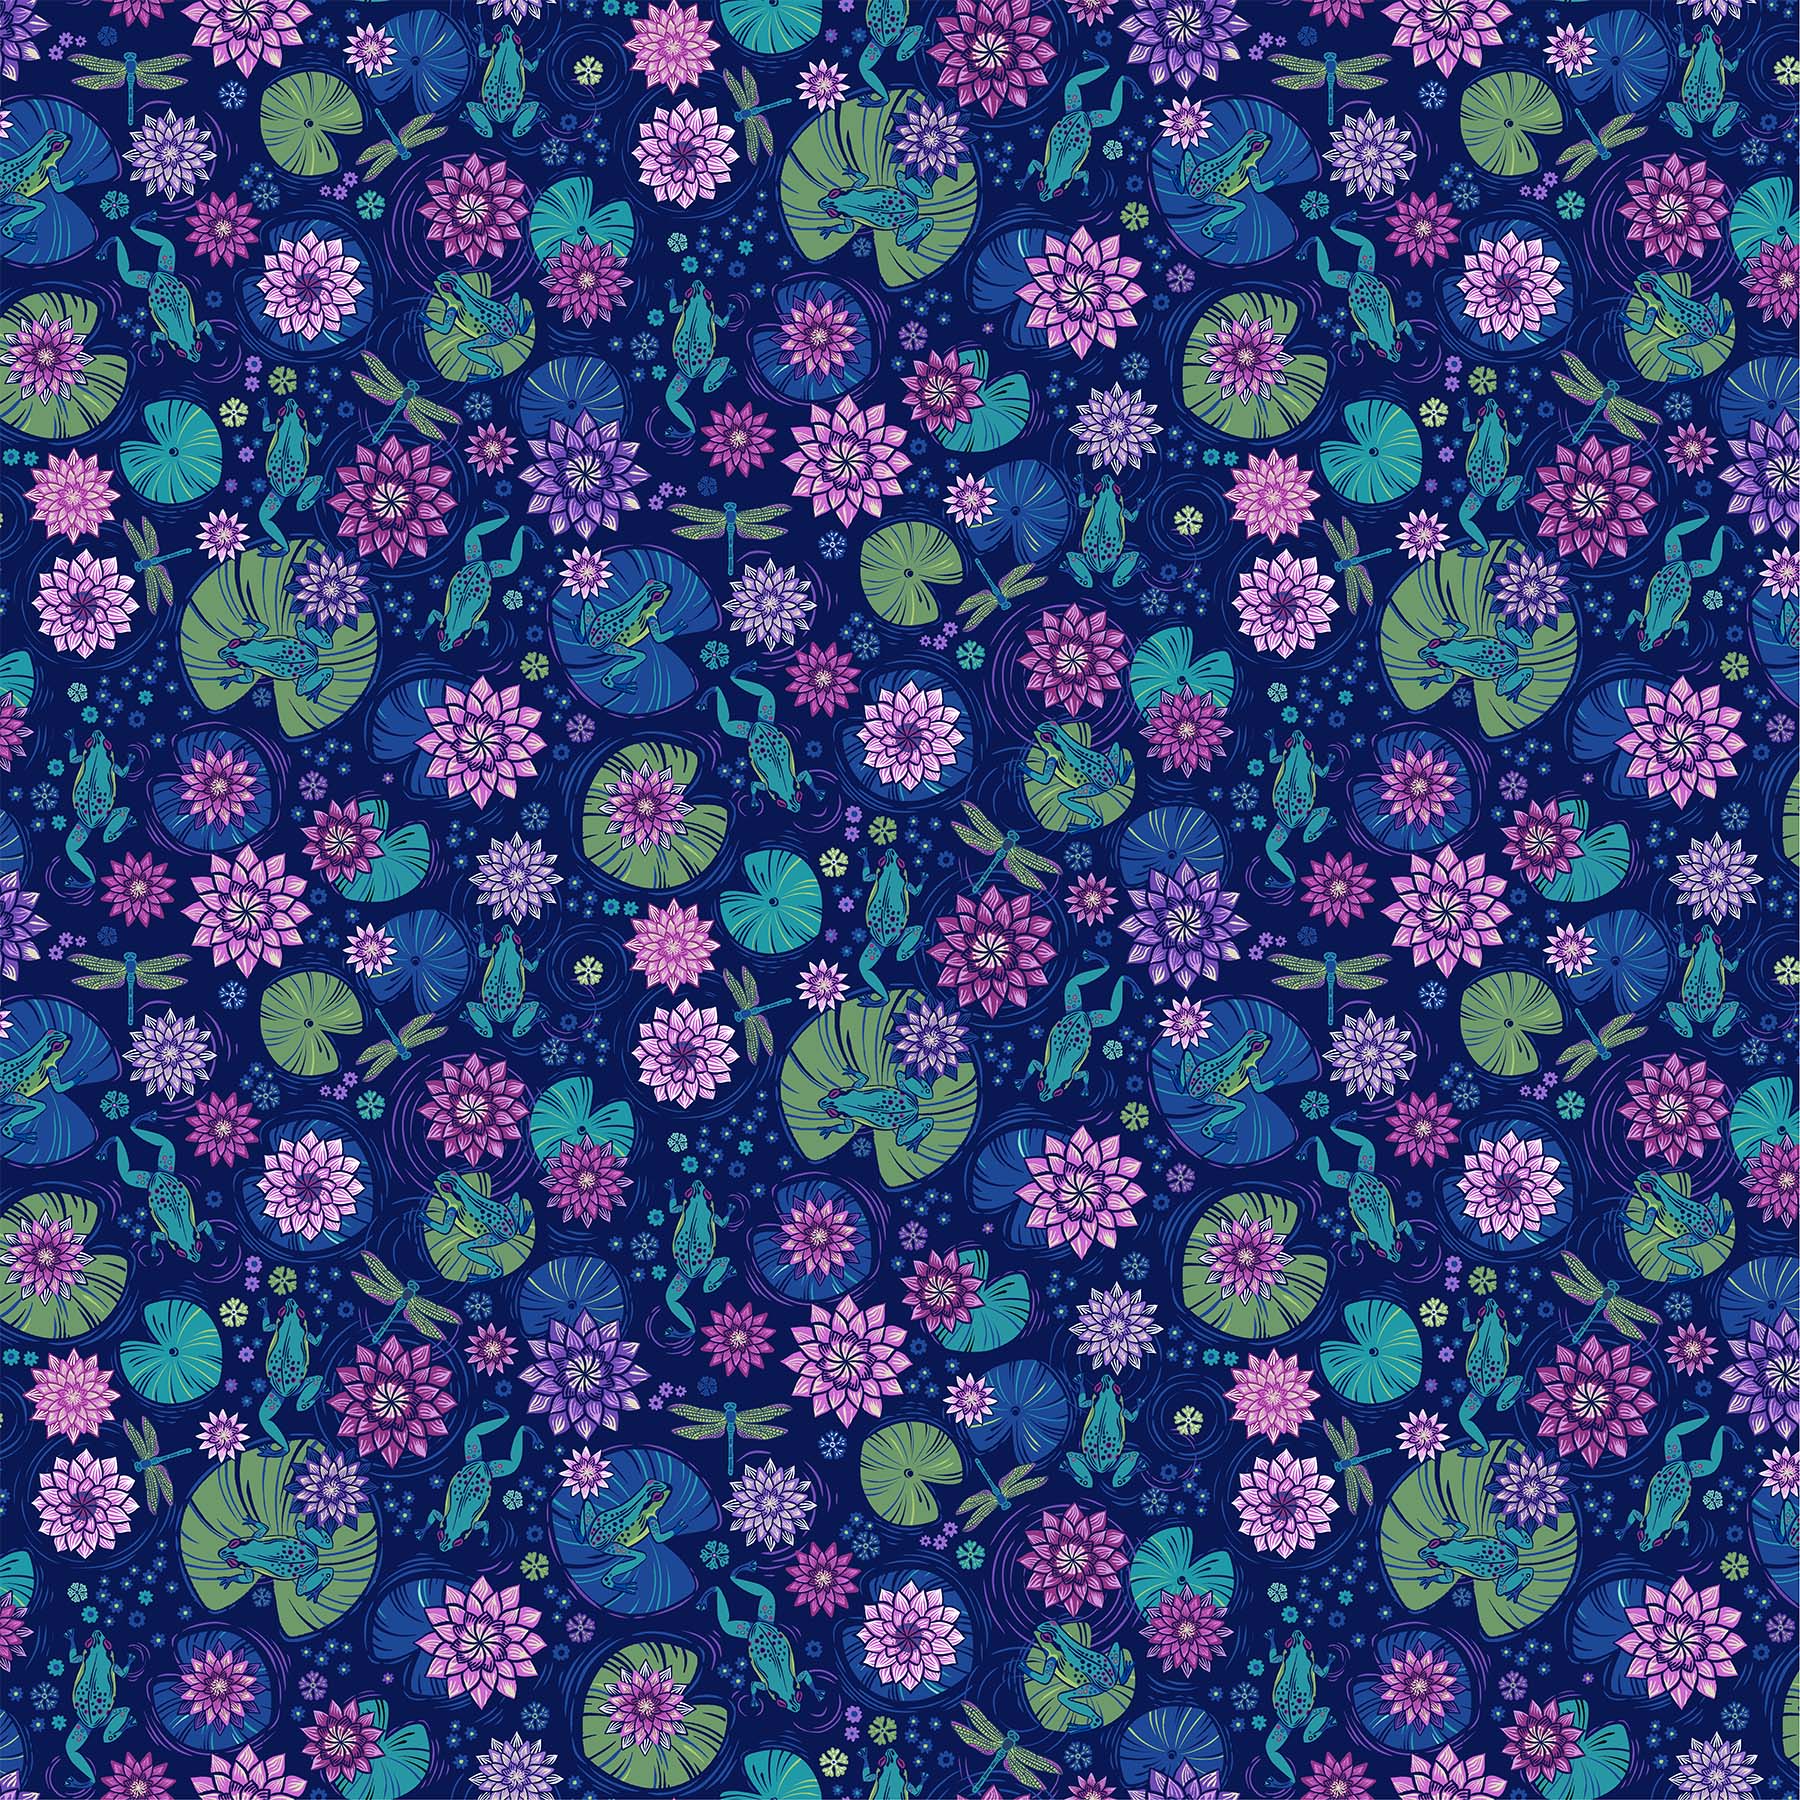 Waters Edge - 26711-49 - Cotton Fabric